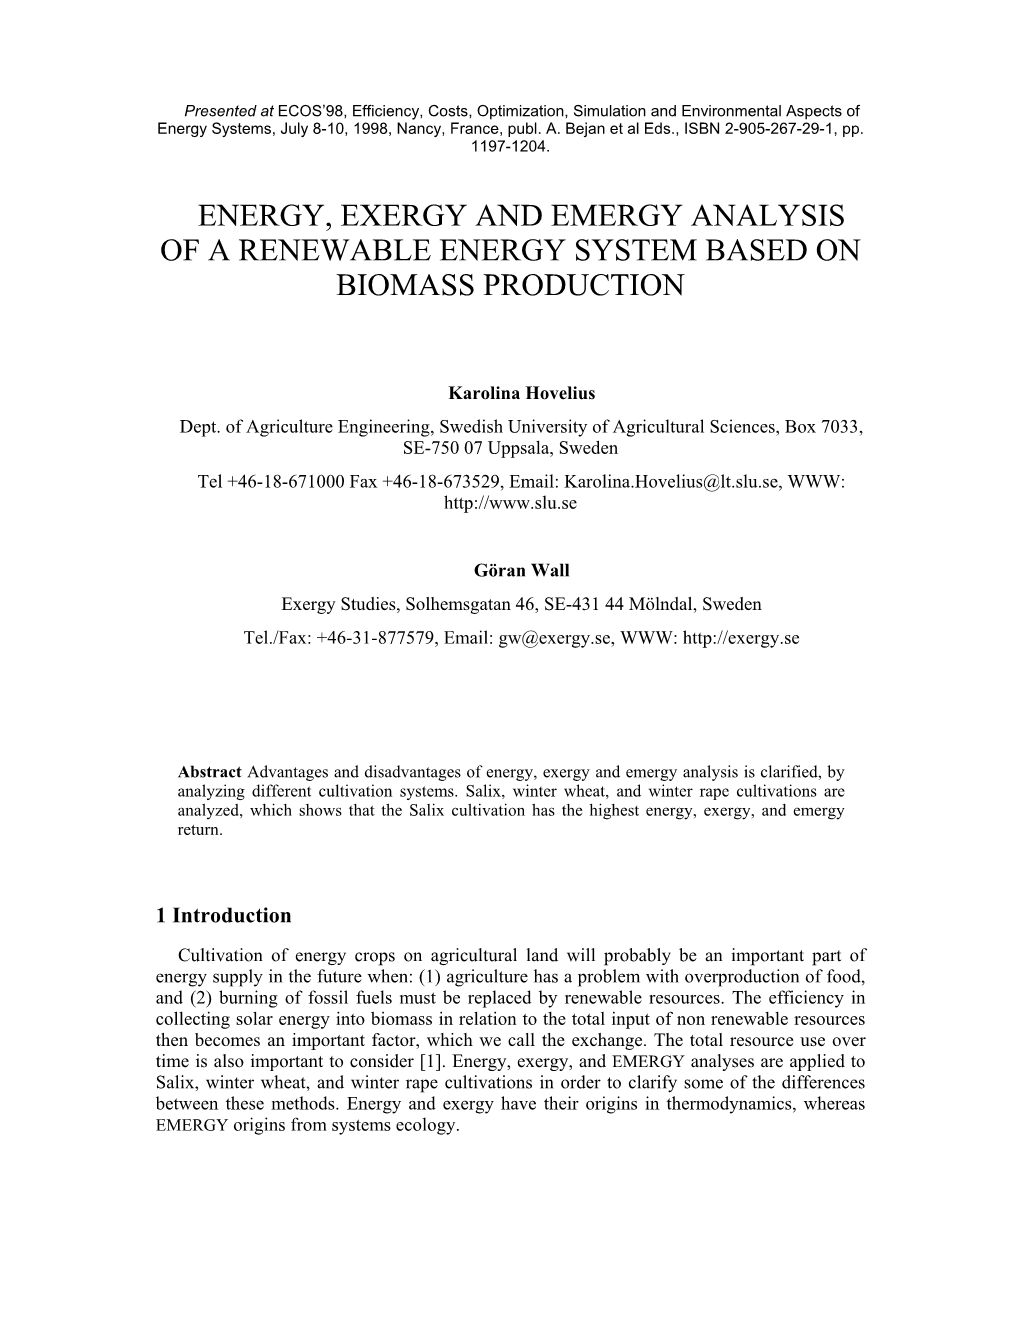 Energy, Exergy and Emergy Analysis of a Renewable Energy System Based on Biomass Production